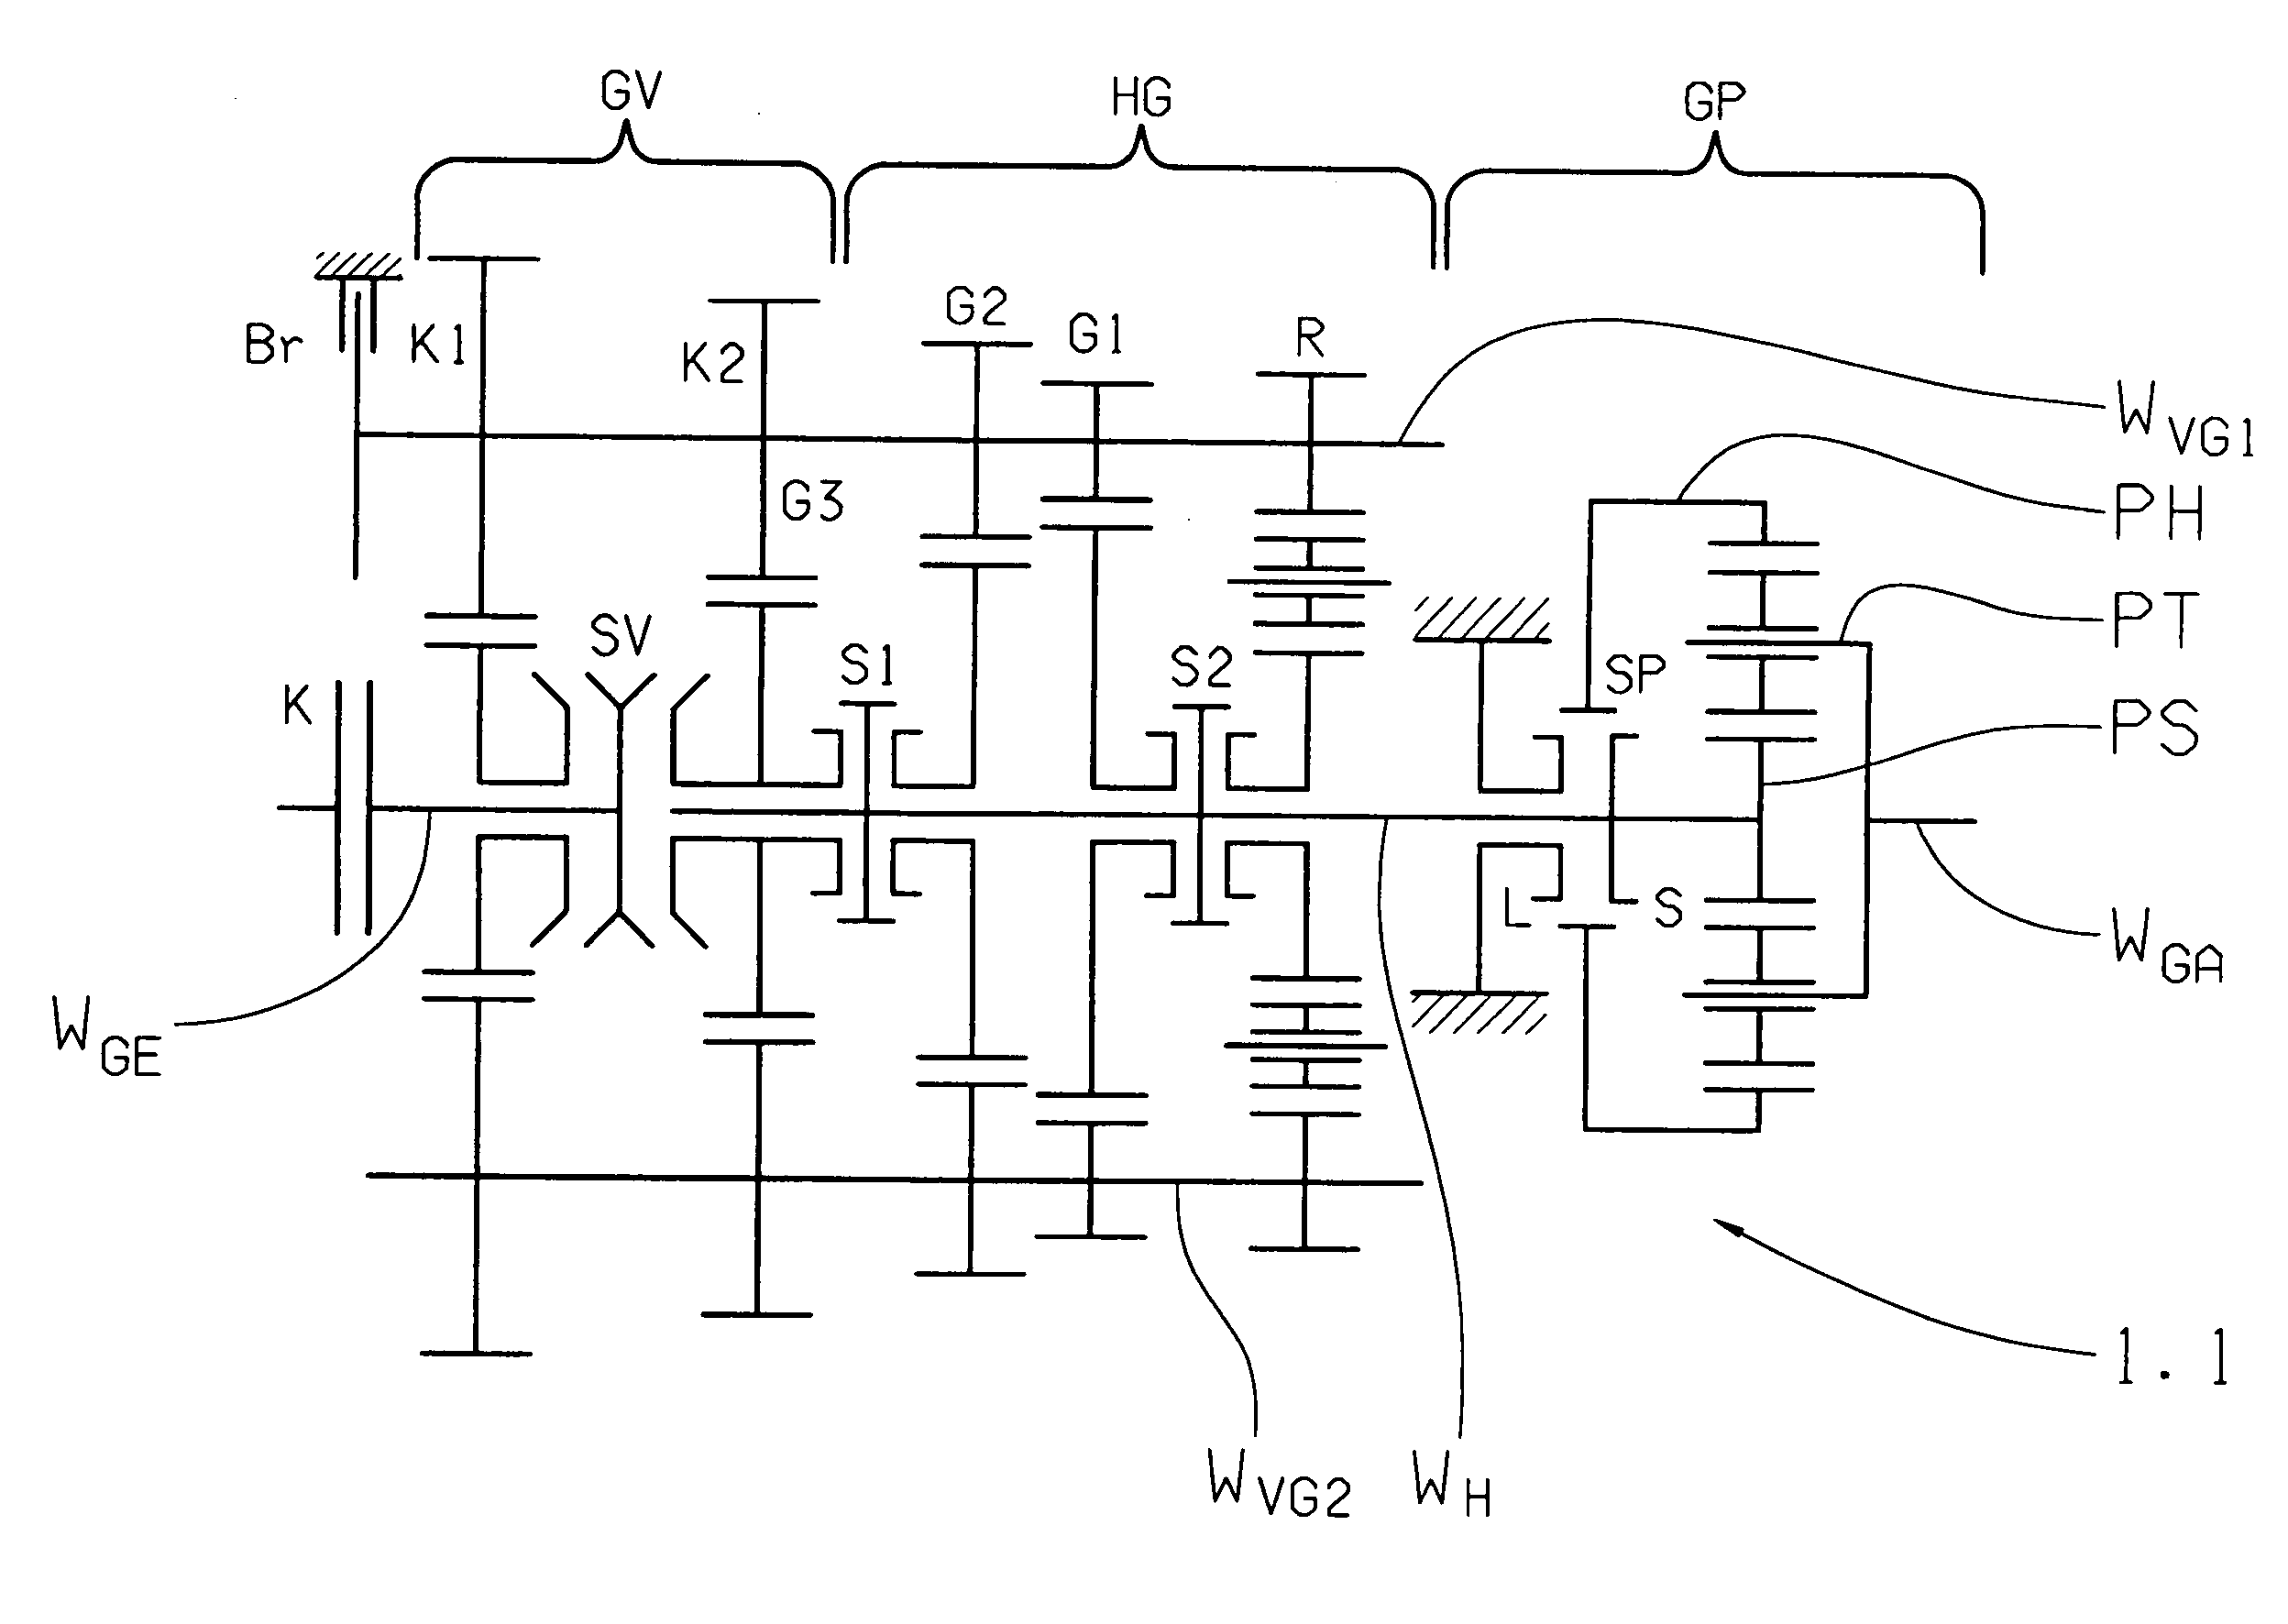 Method for shifting actuation of an automated group transmission